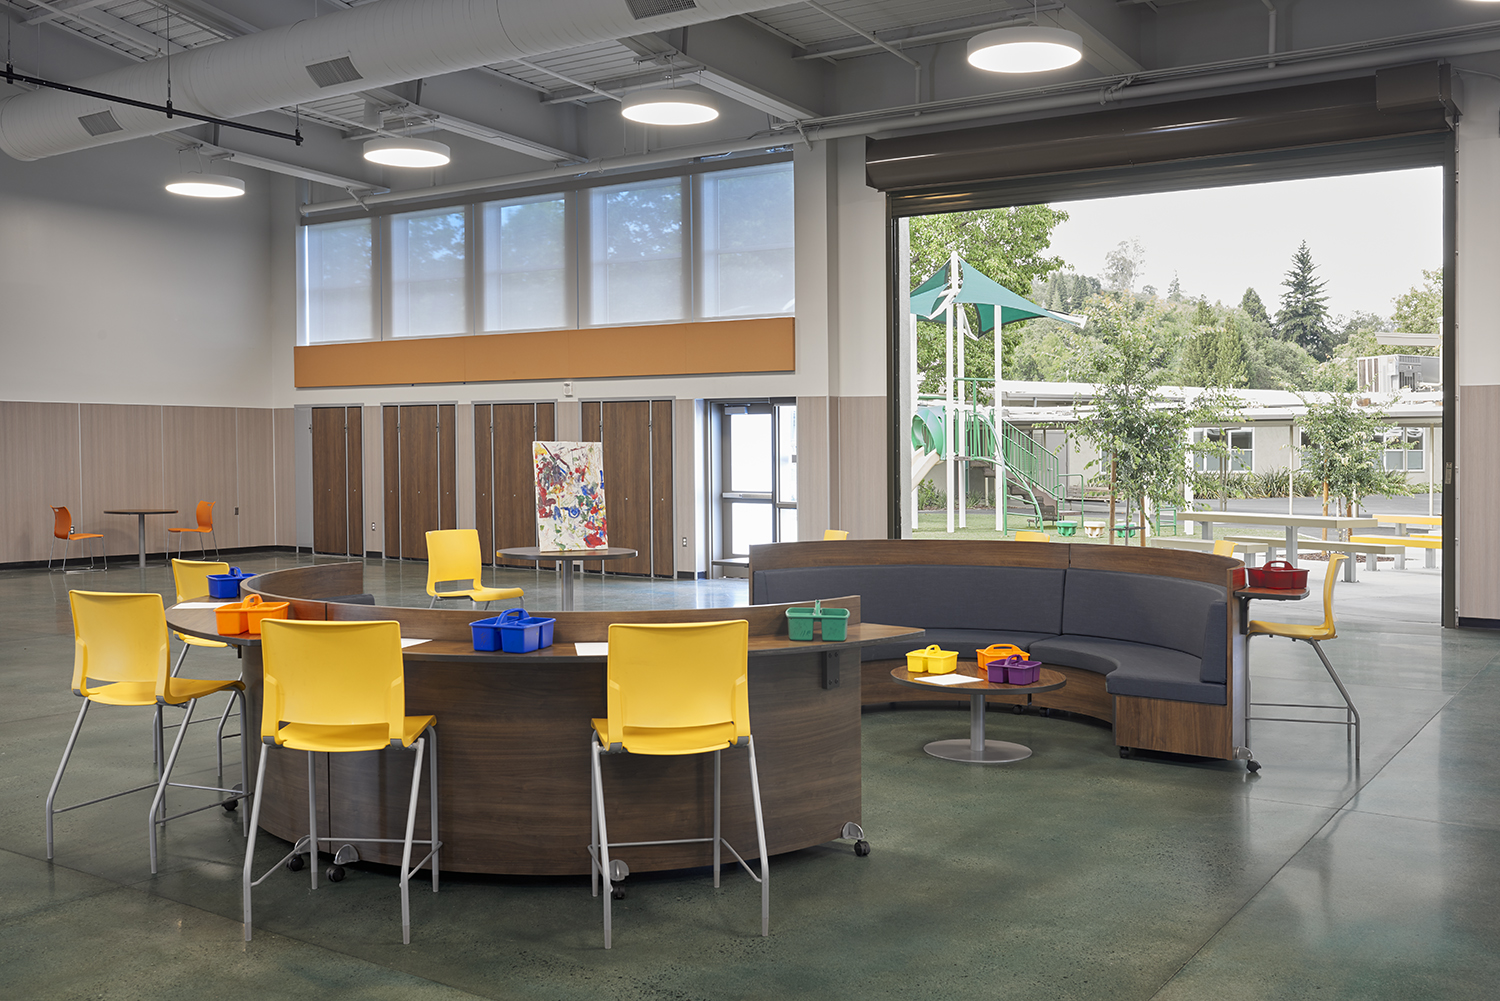 Indoor space with tables and chairs at Tice Creek School